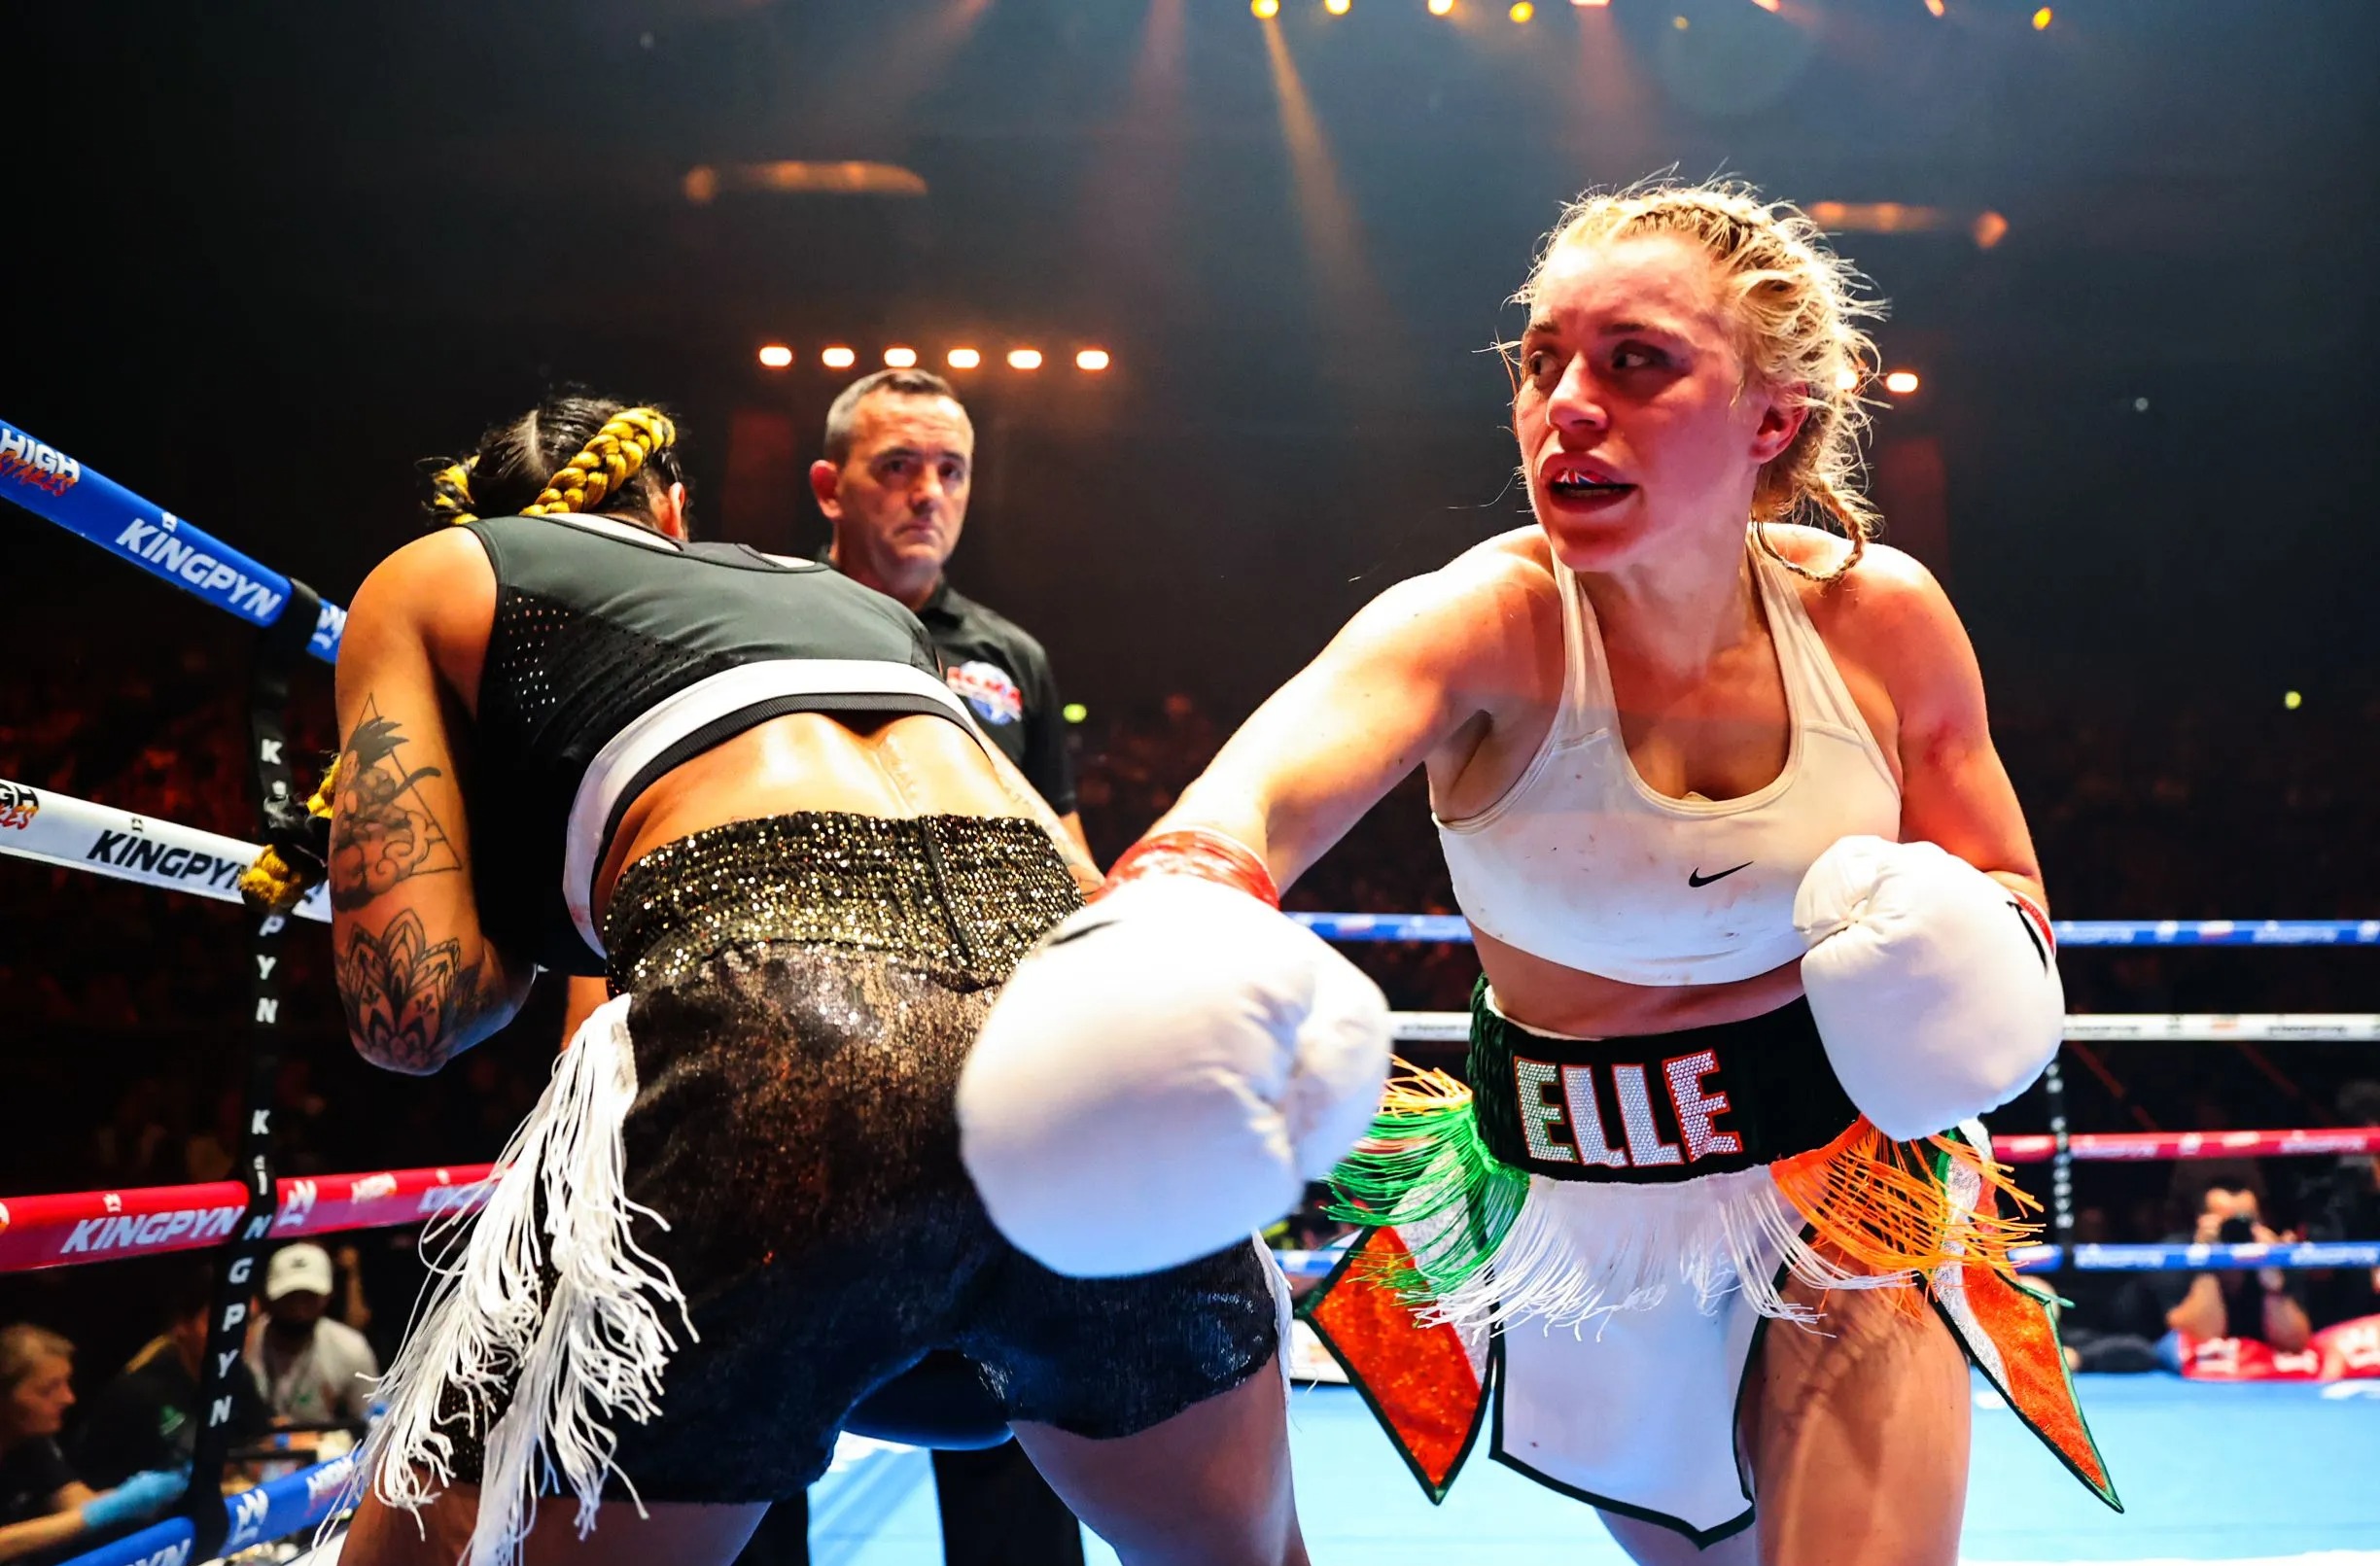 Elle suffered her first defeat last night as she lost to Jully Poca